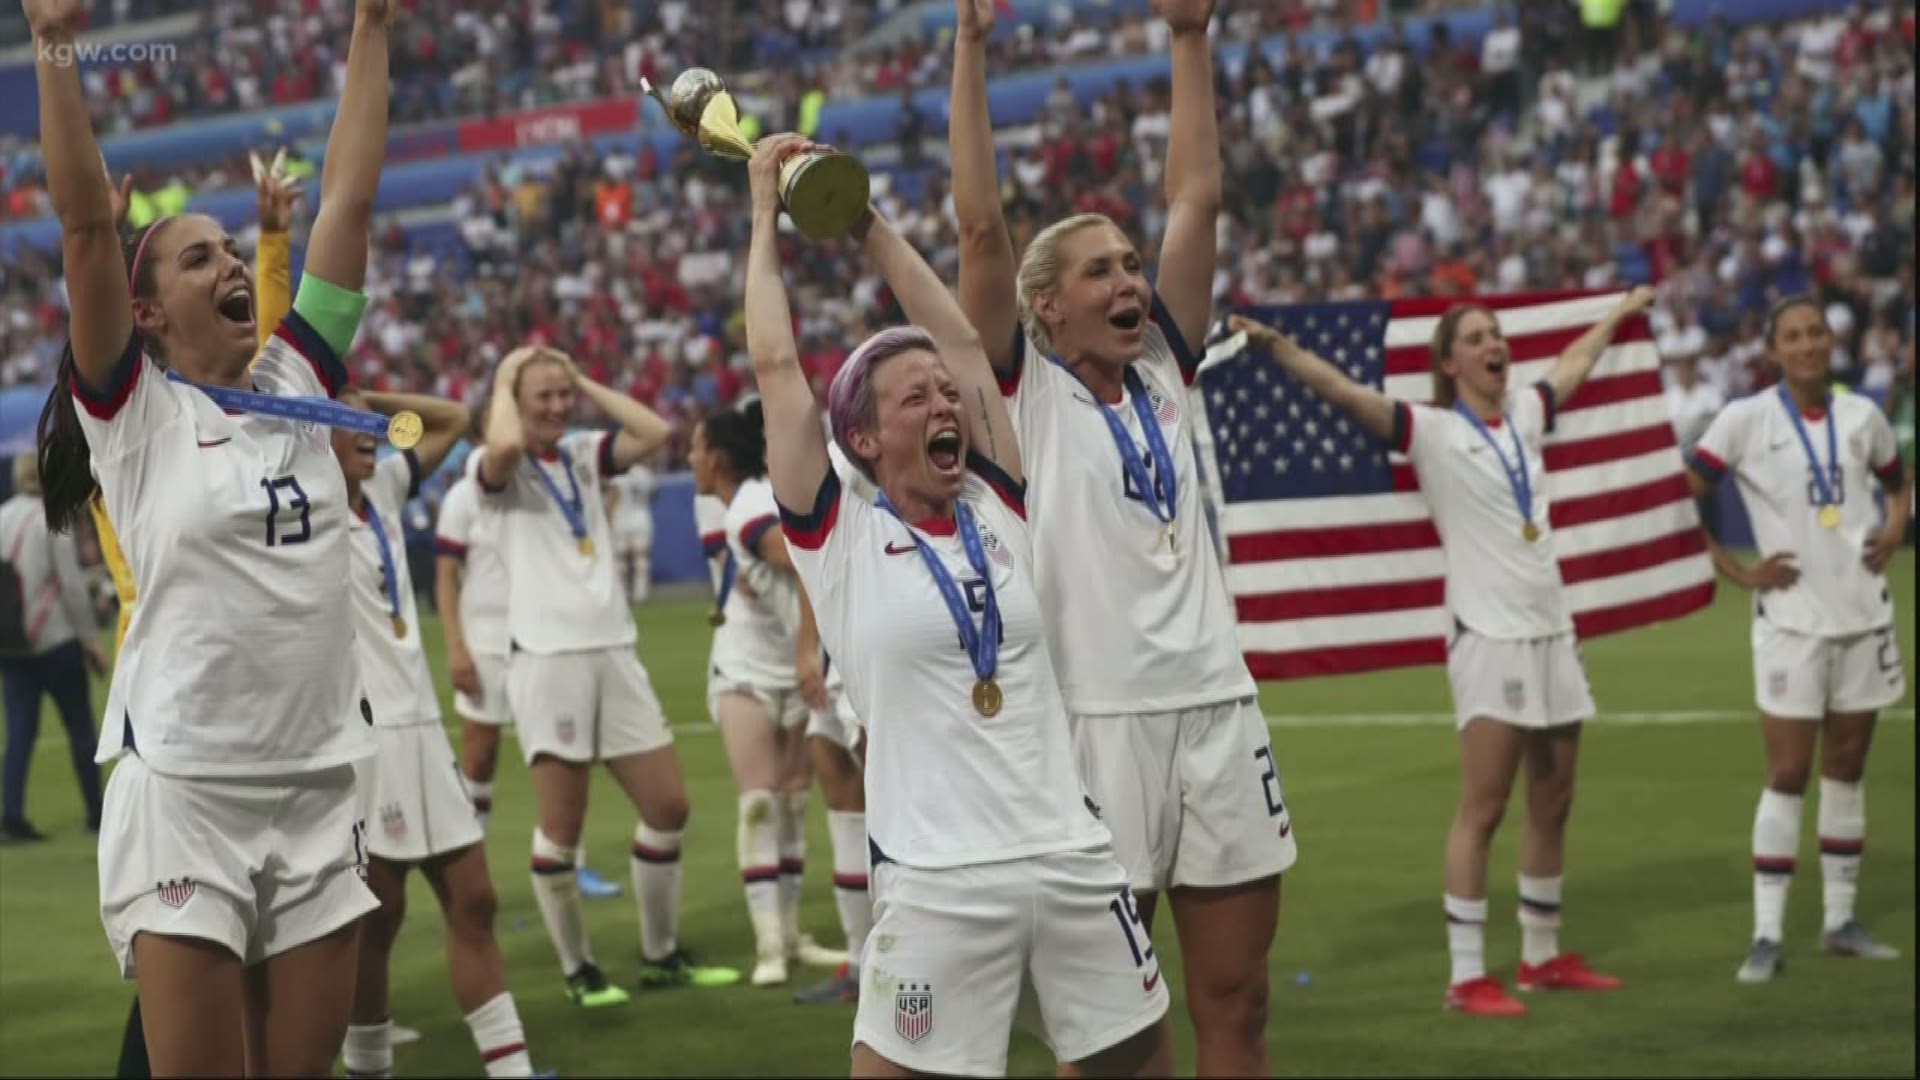 The Portland Thorns share their thoughts on the impact of the U.S. Women’s National Team’s World Cup win.